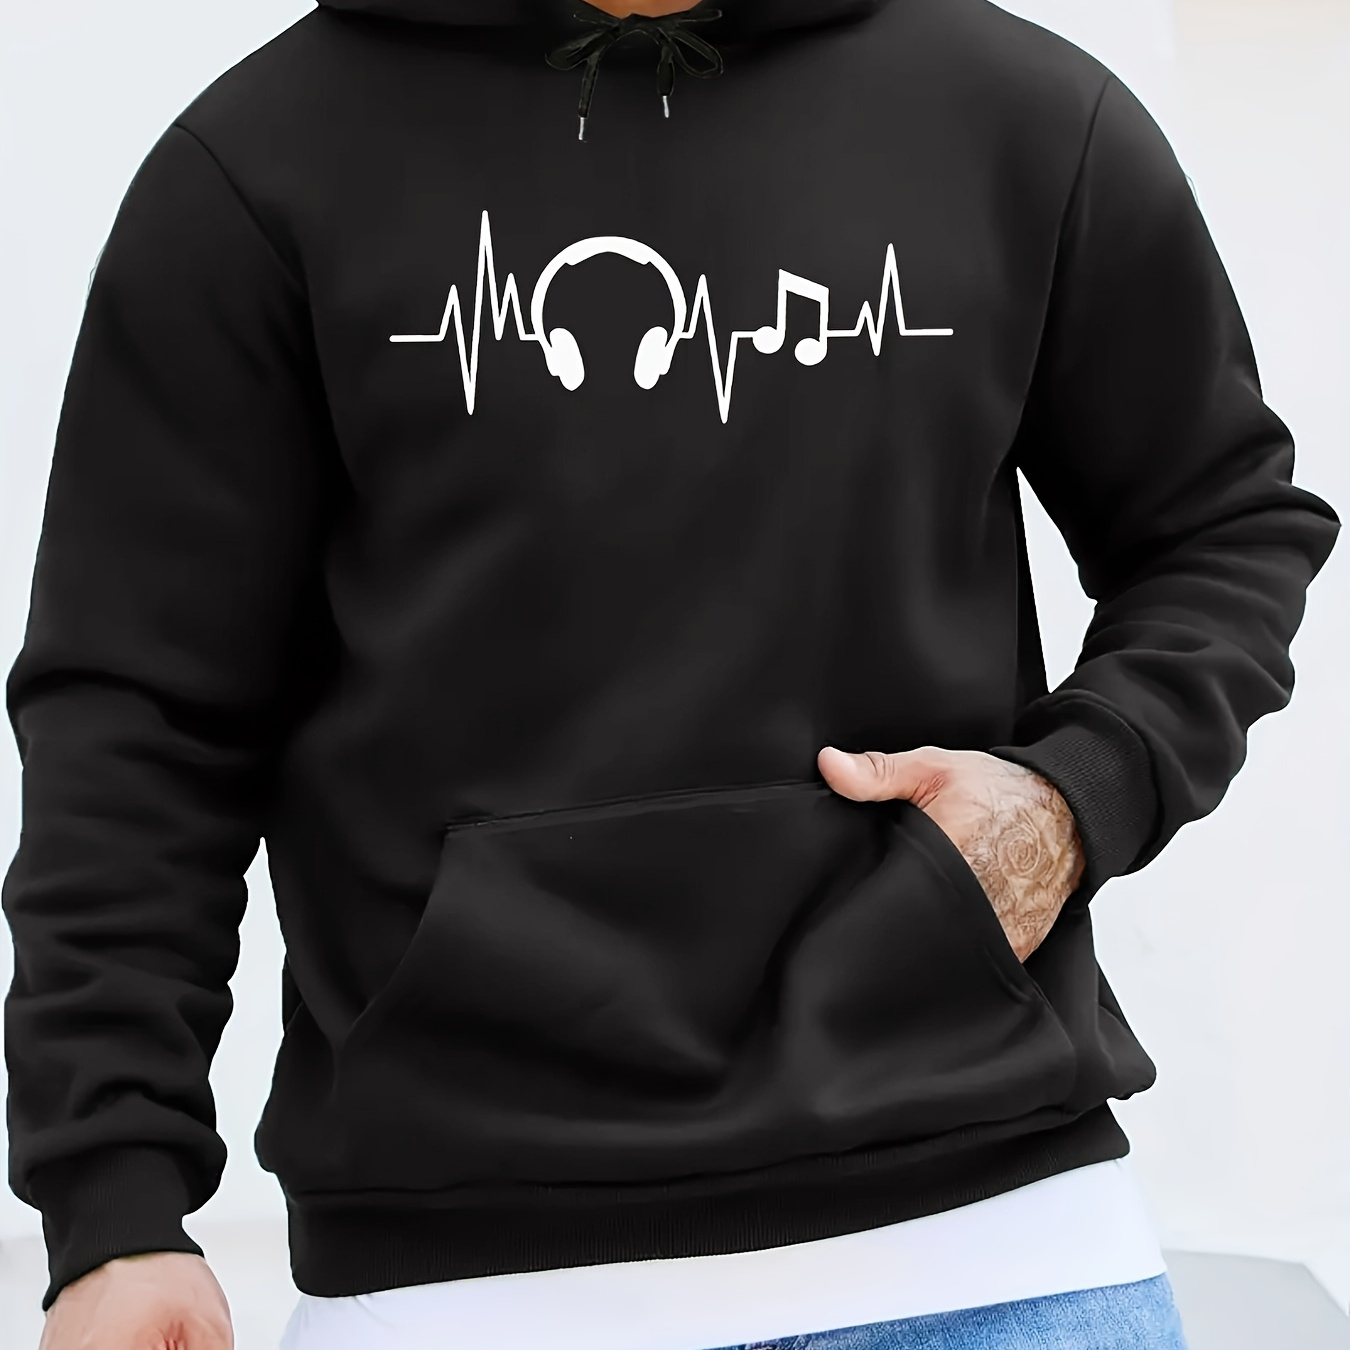 

Headphone Pattern Print Hooded Sweatshirt, Personalized Hoodies Fashion Casual Tops For Spring Autumn, Men's Clothing